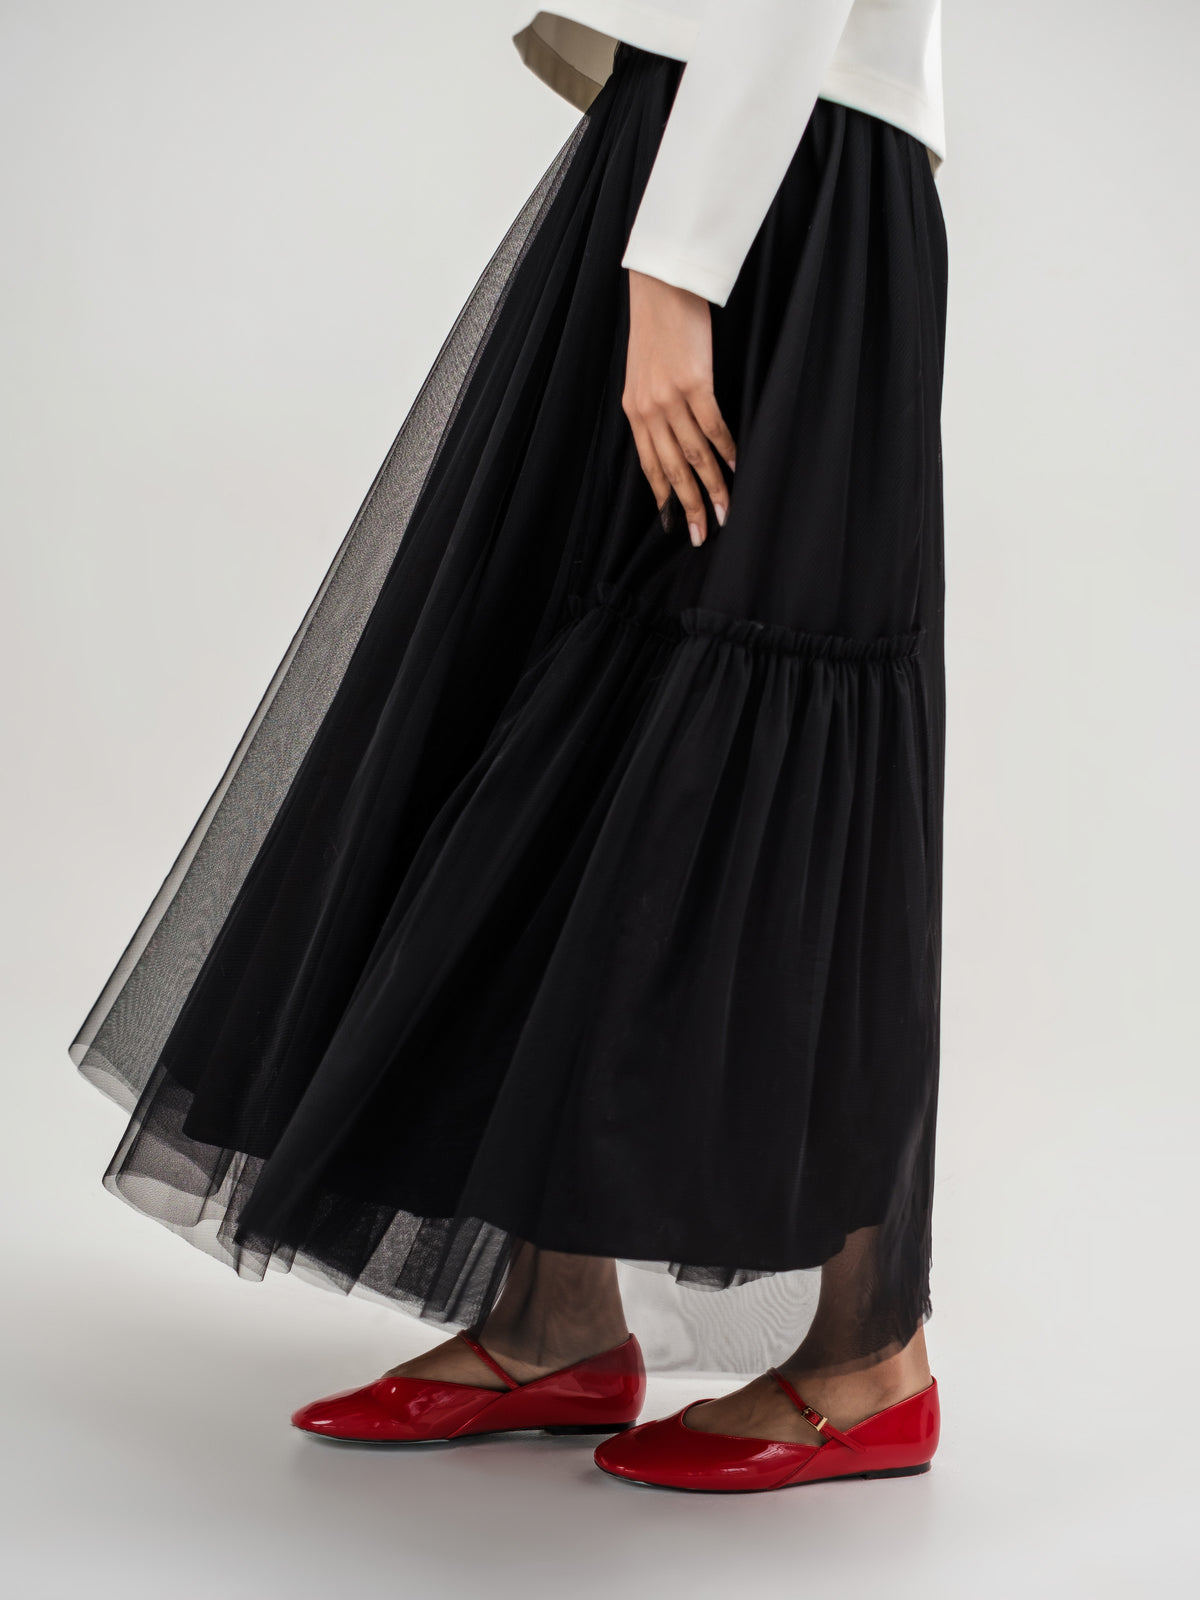 Black tulle lined skirt with elastic waist one size